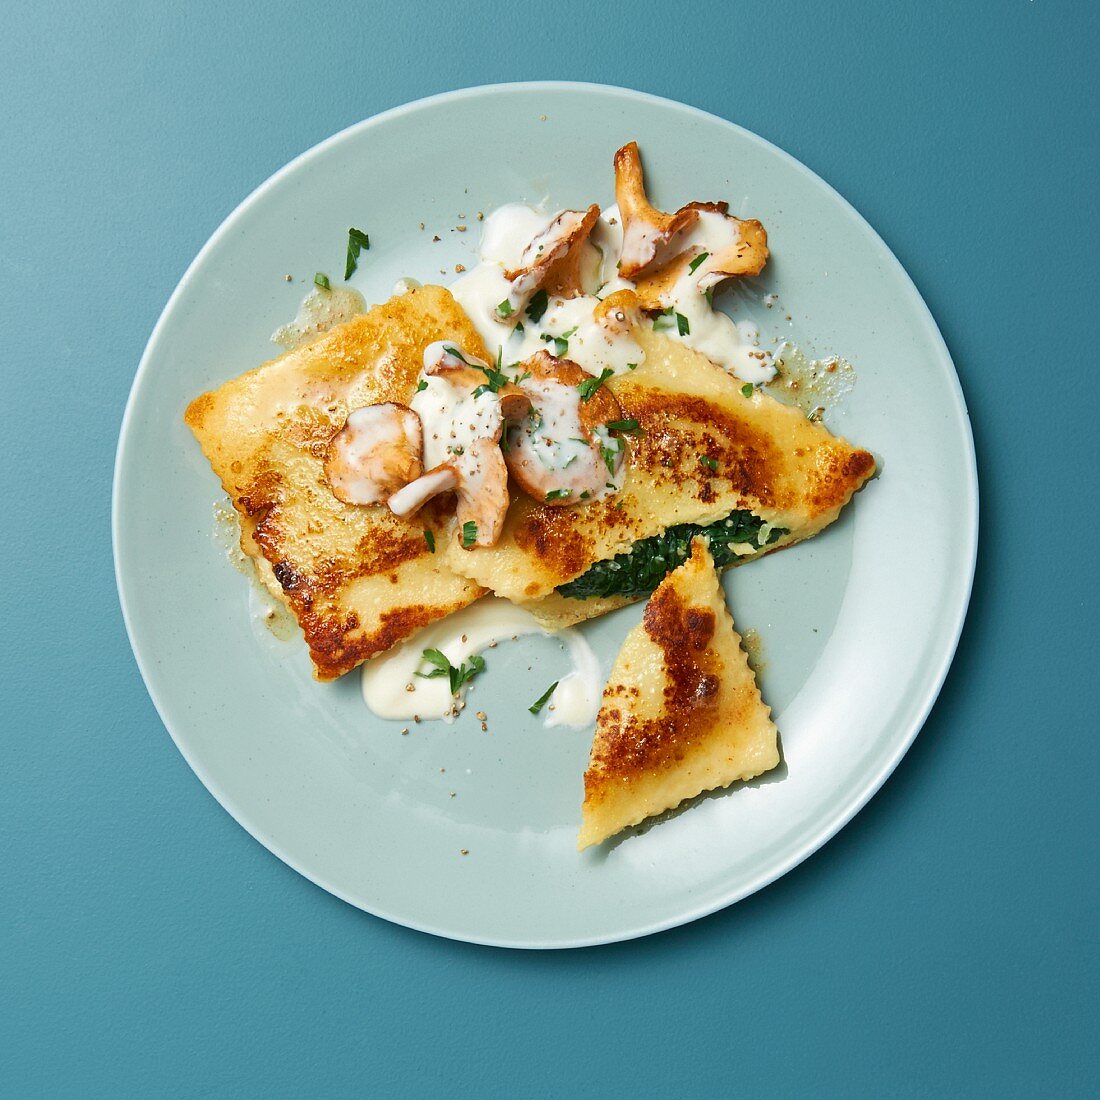 Fried potato dumplings with gorgonzola and spinach and cream, on chanterelles